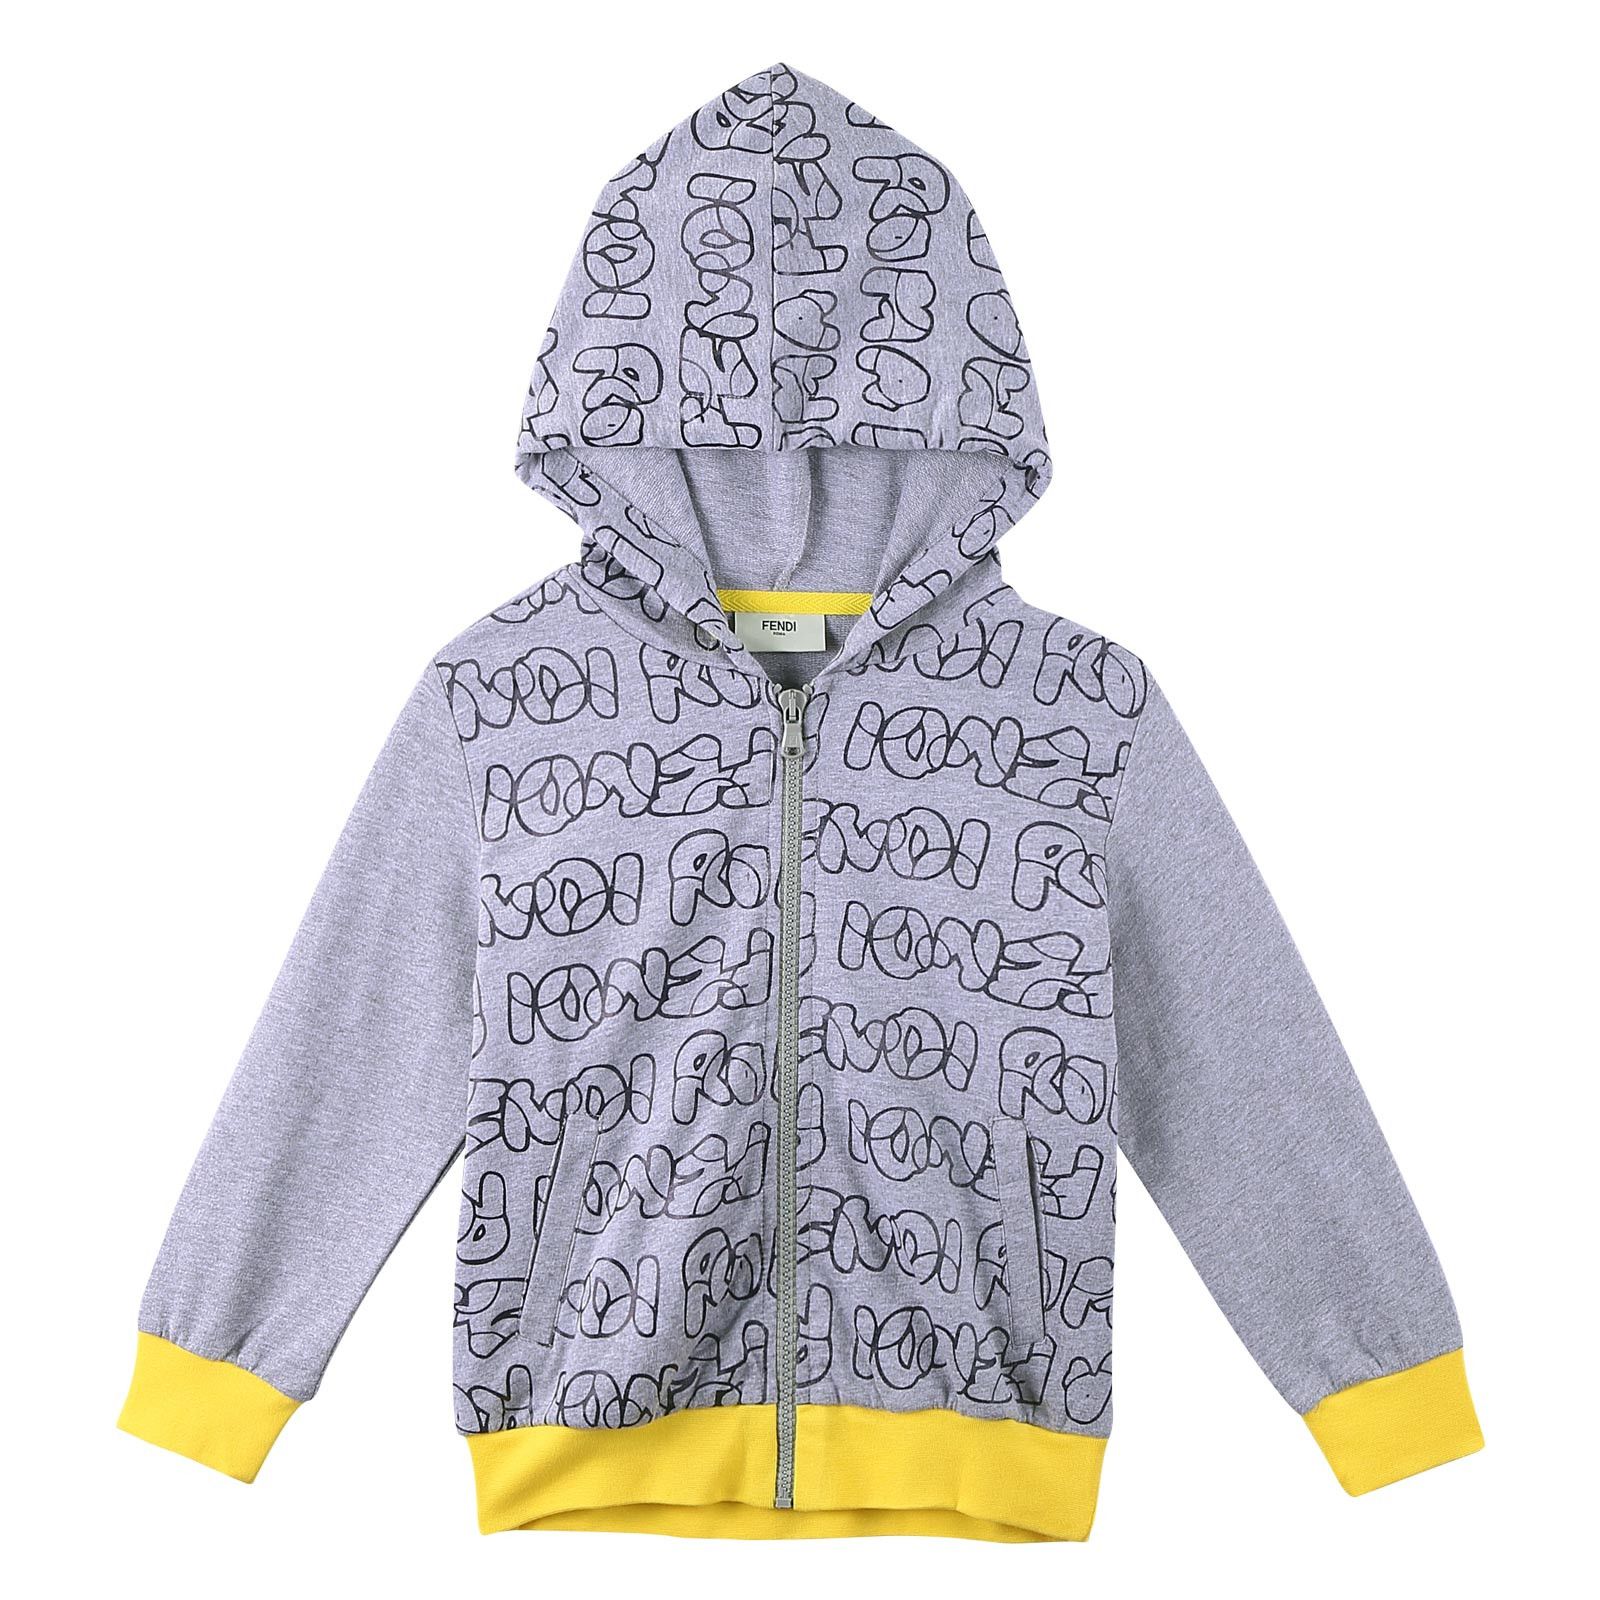 Boys Grey Cotton Printed Trims Zip-up Tops With Yellow Cuffs - CÉMAROSE | Children's Fashion Store - 1